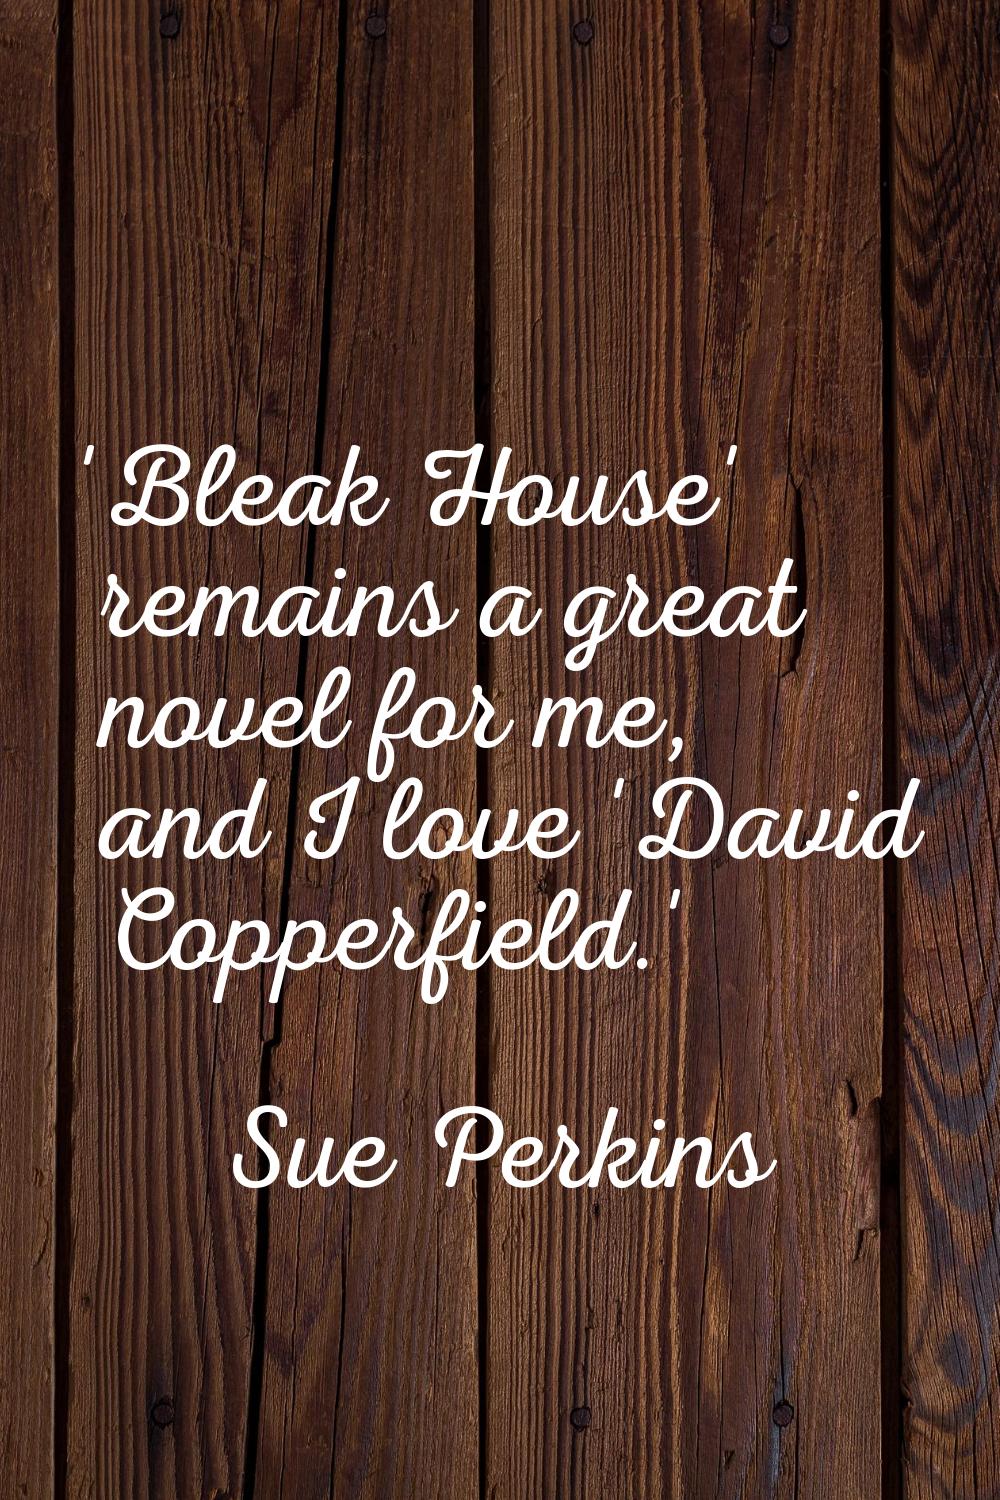 'Bleak House' remains a great novel for me, and I love 'David Copperfield.'